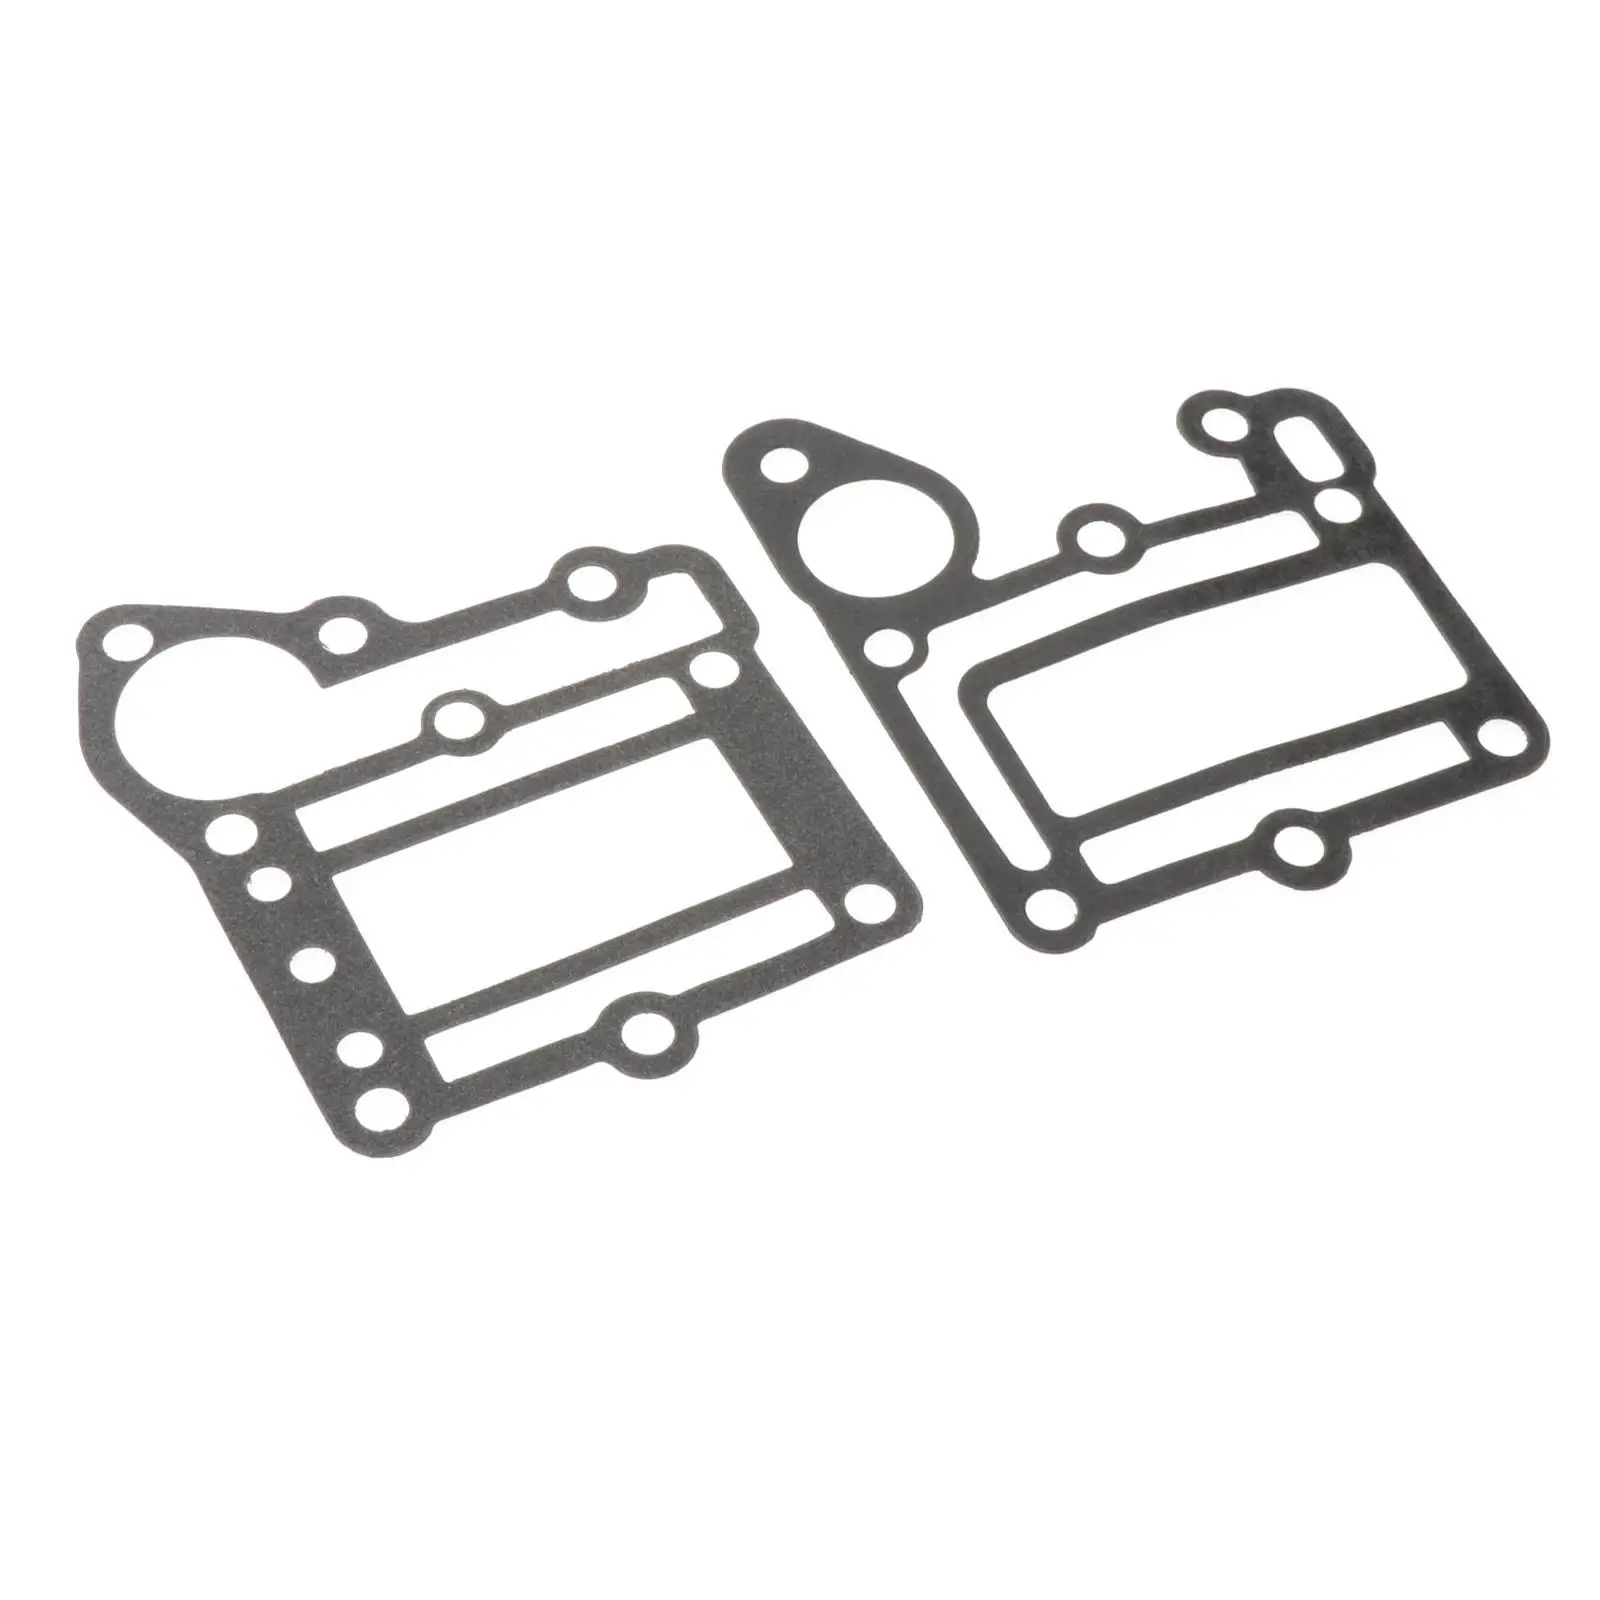 2 Pieces Exhaust Jacket Gaskets 6E0-411 6E0-41114-A0 Outboard Motors for